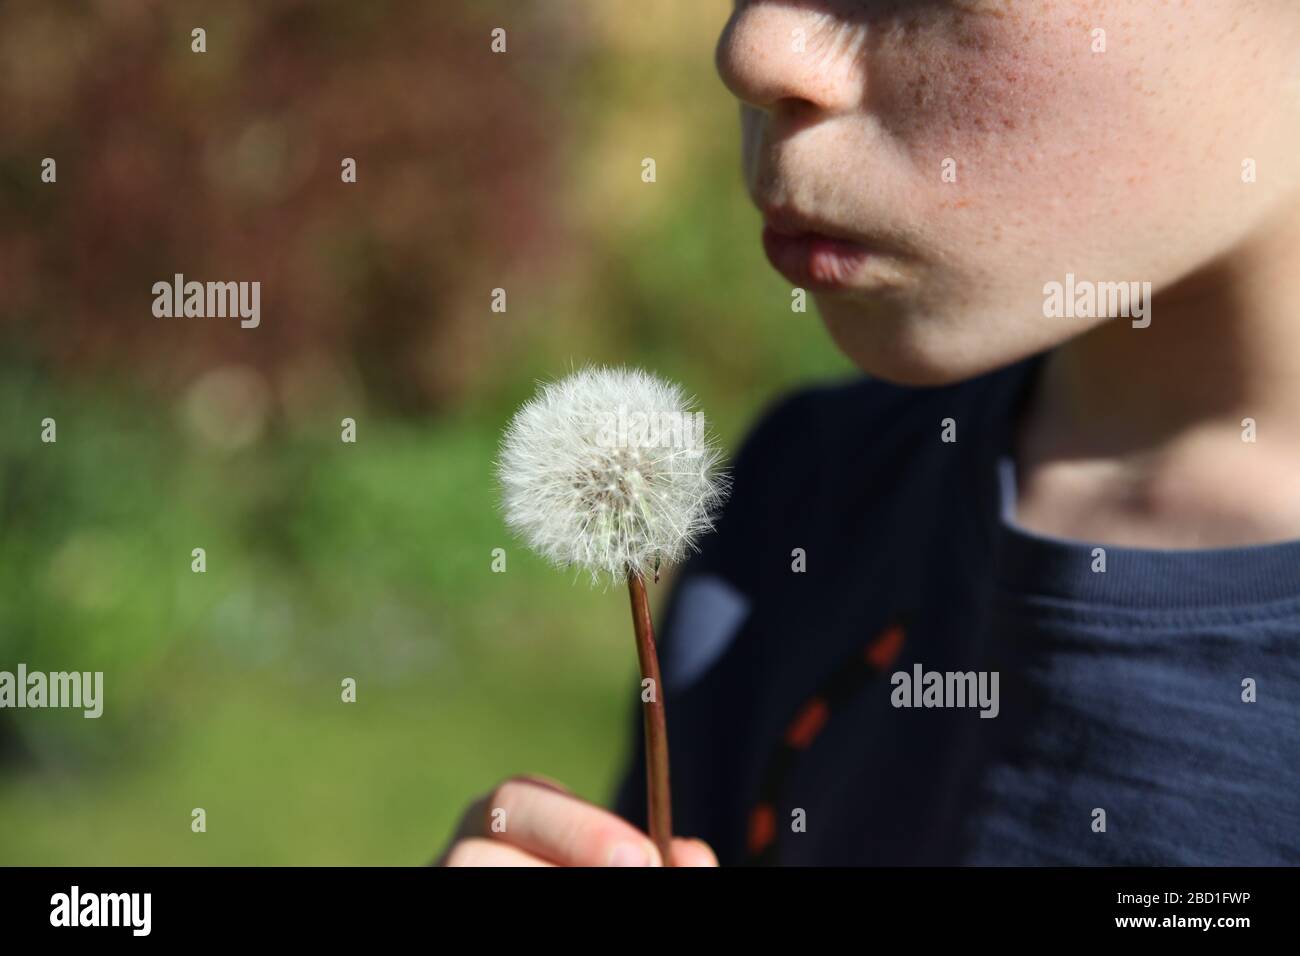 A young boy, aged 9, blowing on a dandelion 'Taraxacum' parachute ball head in a UK garden at daytime, Spring 2020 Stock Photo